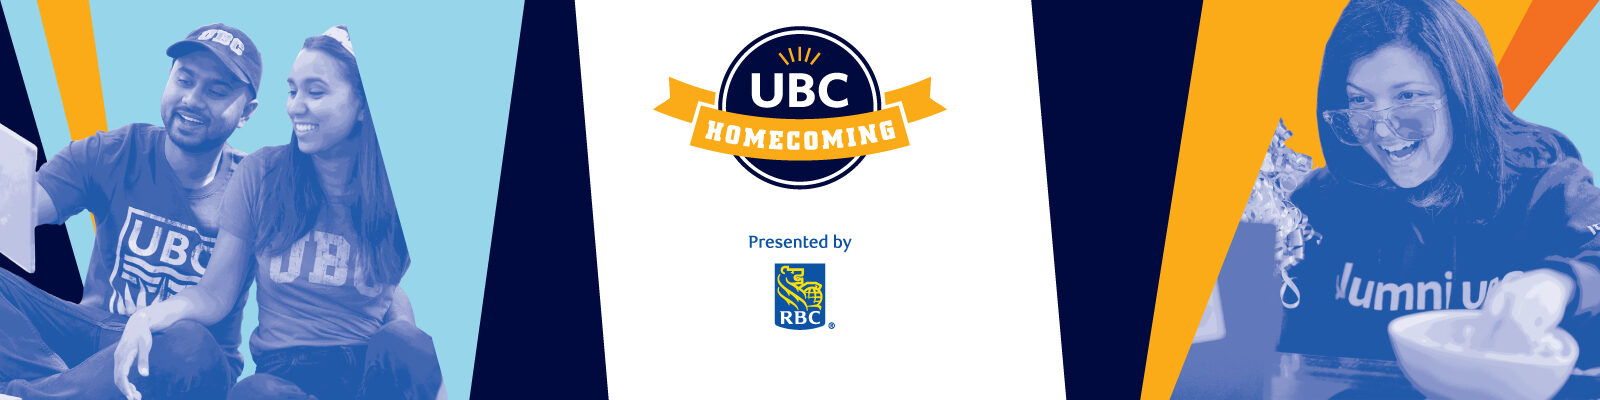 UBC Homecoming presented by RBC